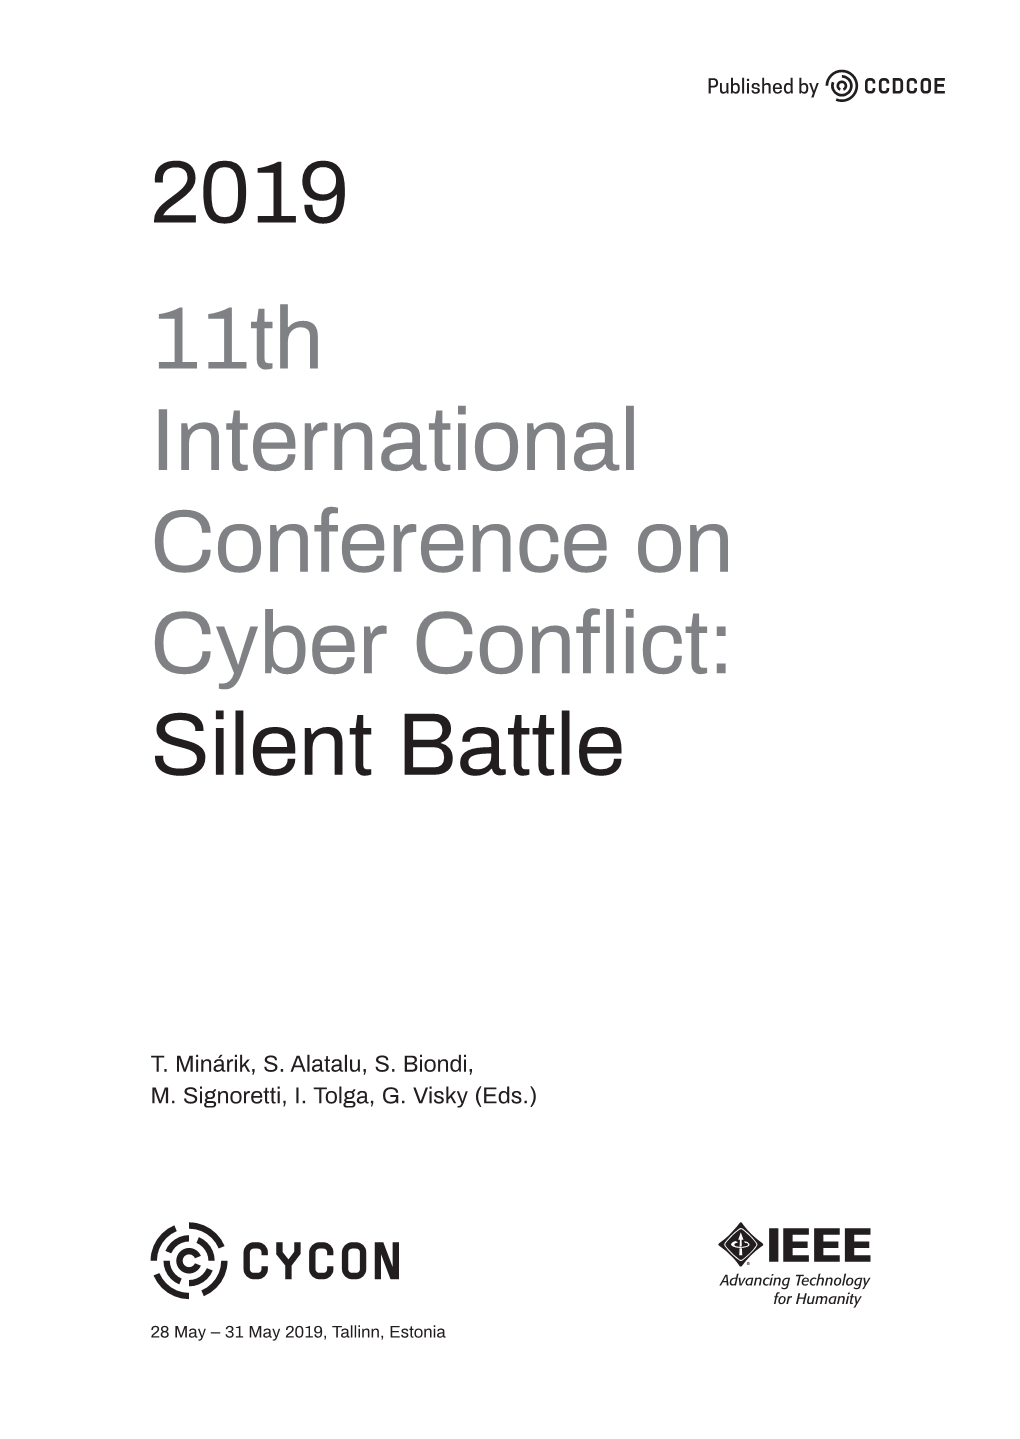 11Th International Conference on Cyber Conflict: Silent Battle 2019